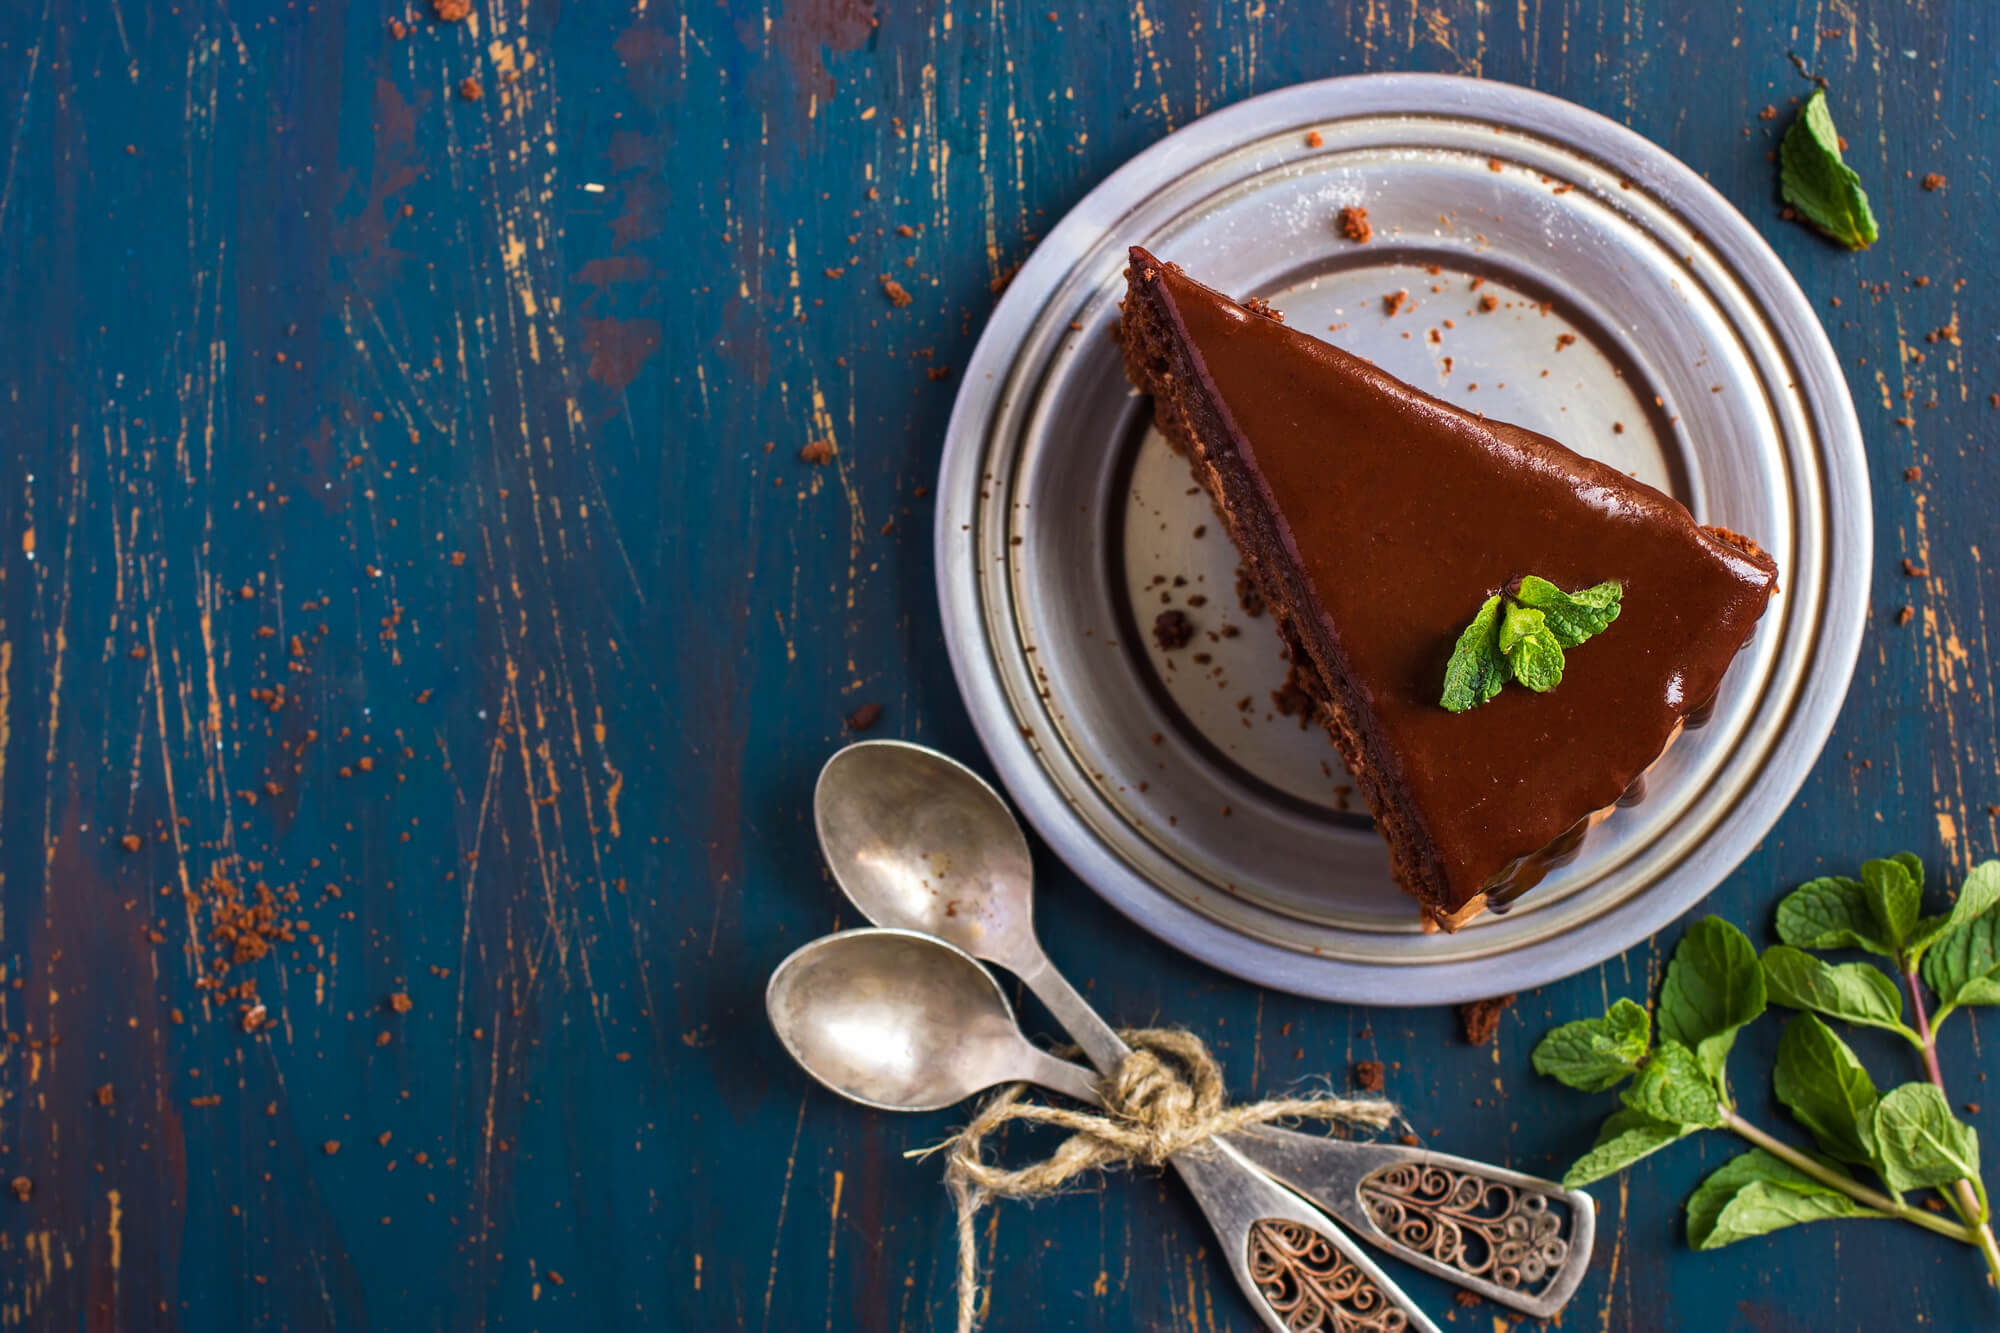 A delicious chocolate torte pairs beautifully with Eximius Coffee.